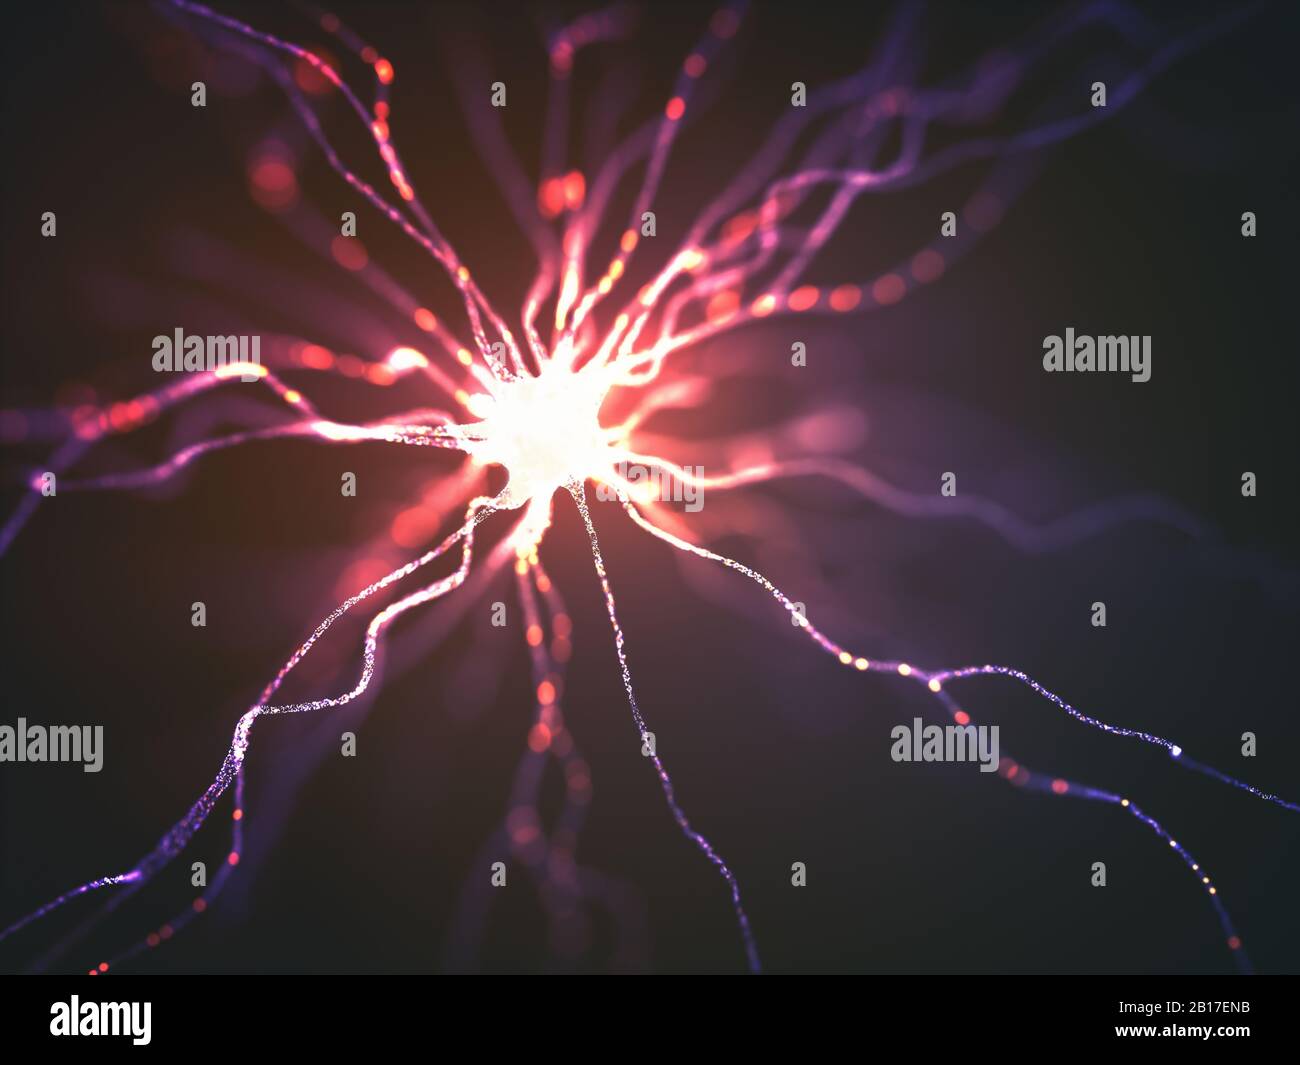 Conceptual image of a neuron energized with electric charge. Concept of science and research of the human brain, 3D illustration. Stock Photo